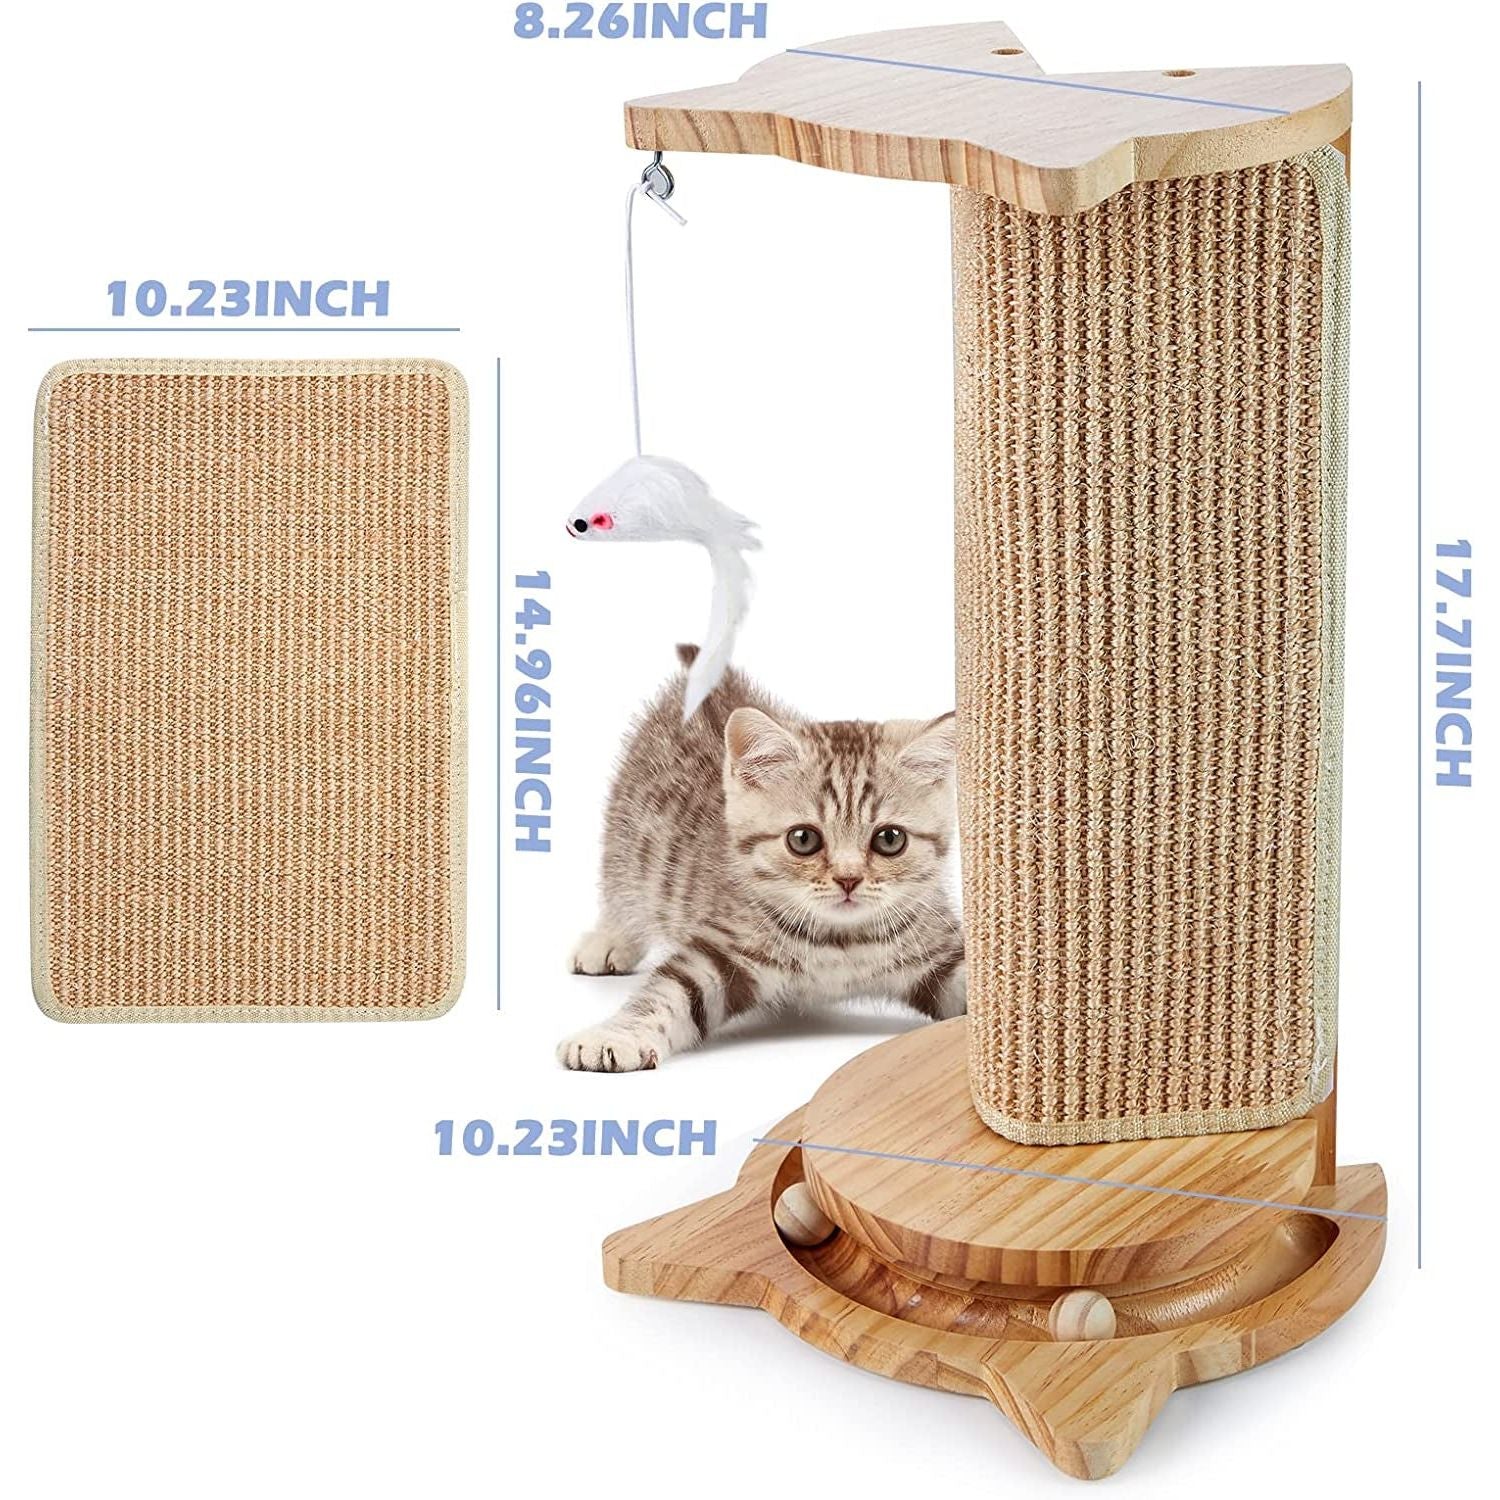 Cat Corner Scratching Post, Cat Scratcher Post for Indoor Cats, Cat Furniture Scratching Deterrent, Wood Scratching Post with Sisal Mat for Couch/Wall Corner Protector with Cat Ball Toy Base